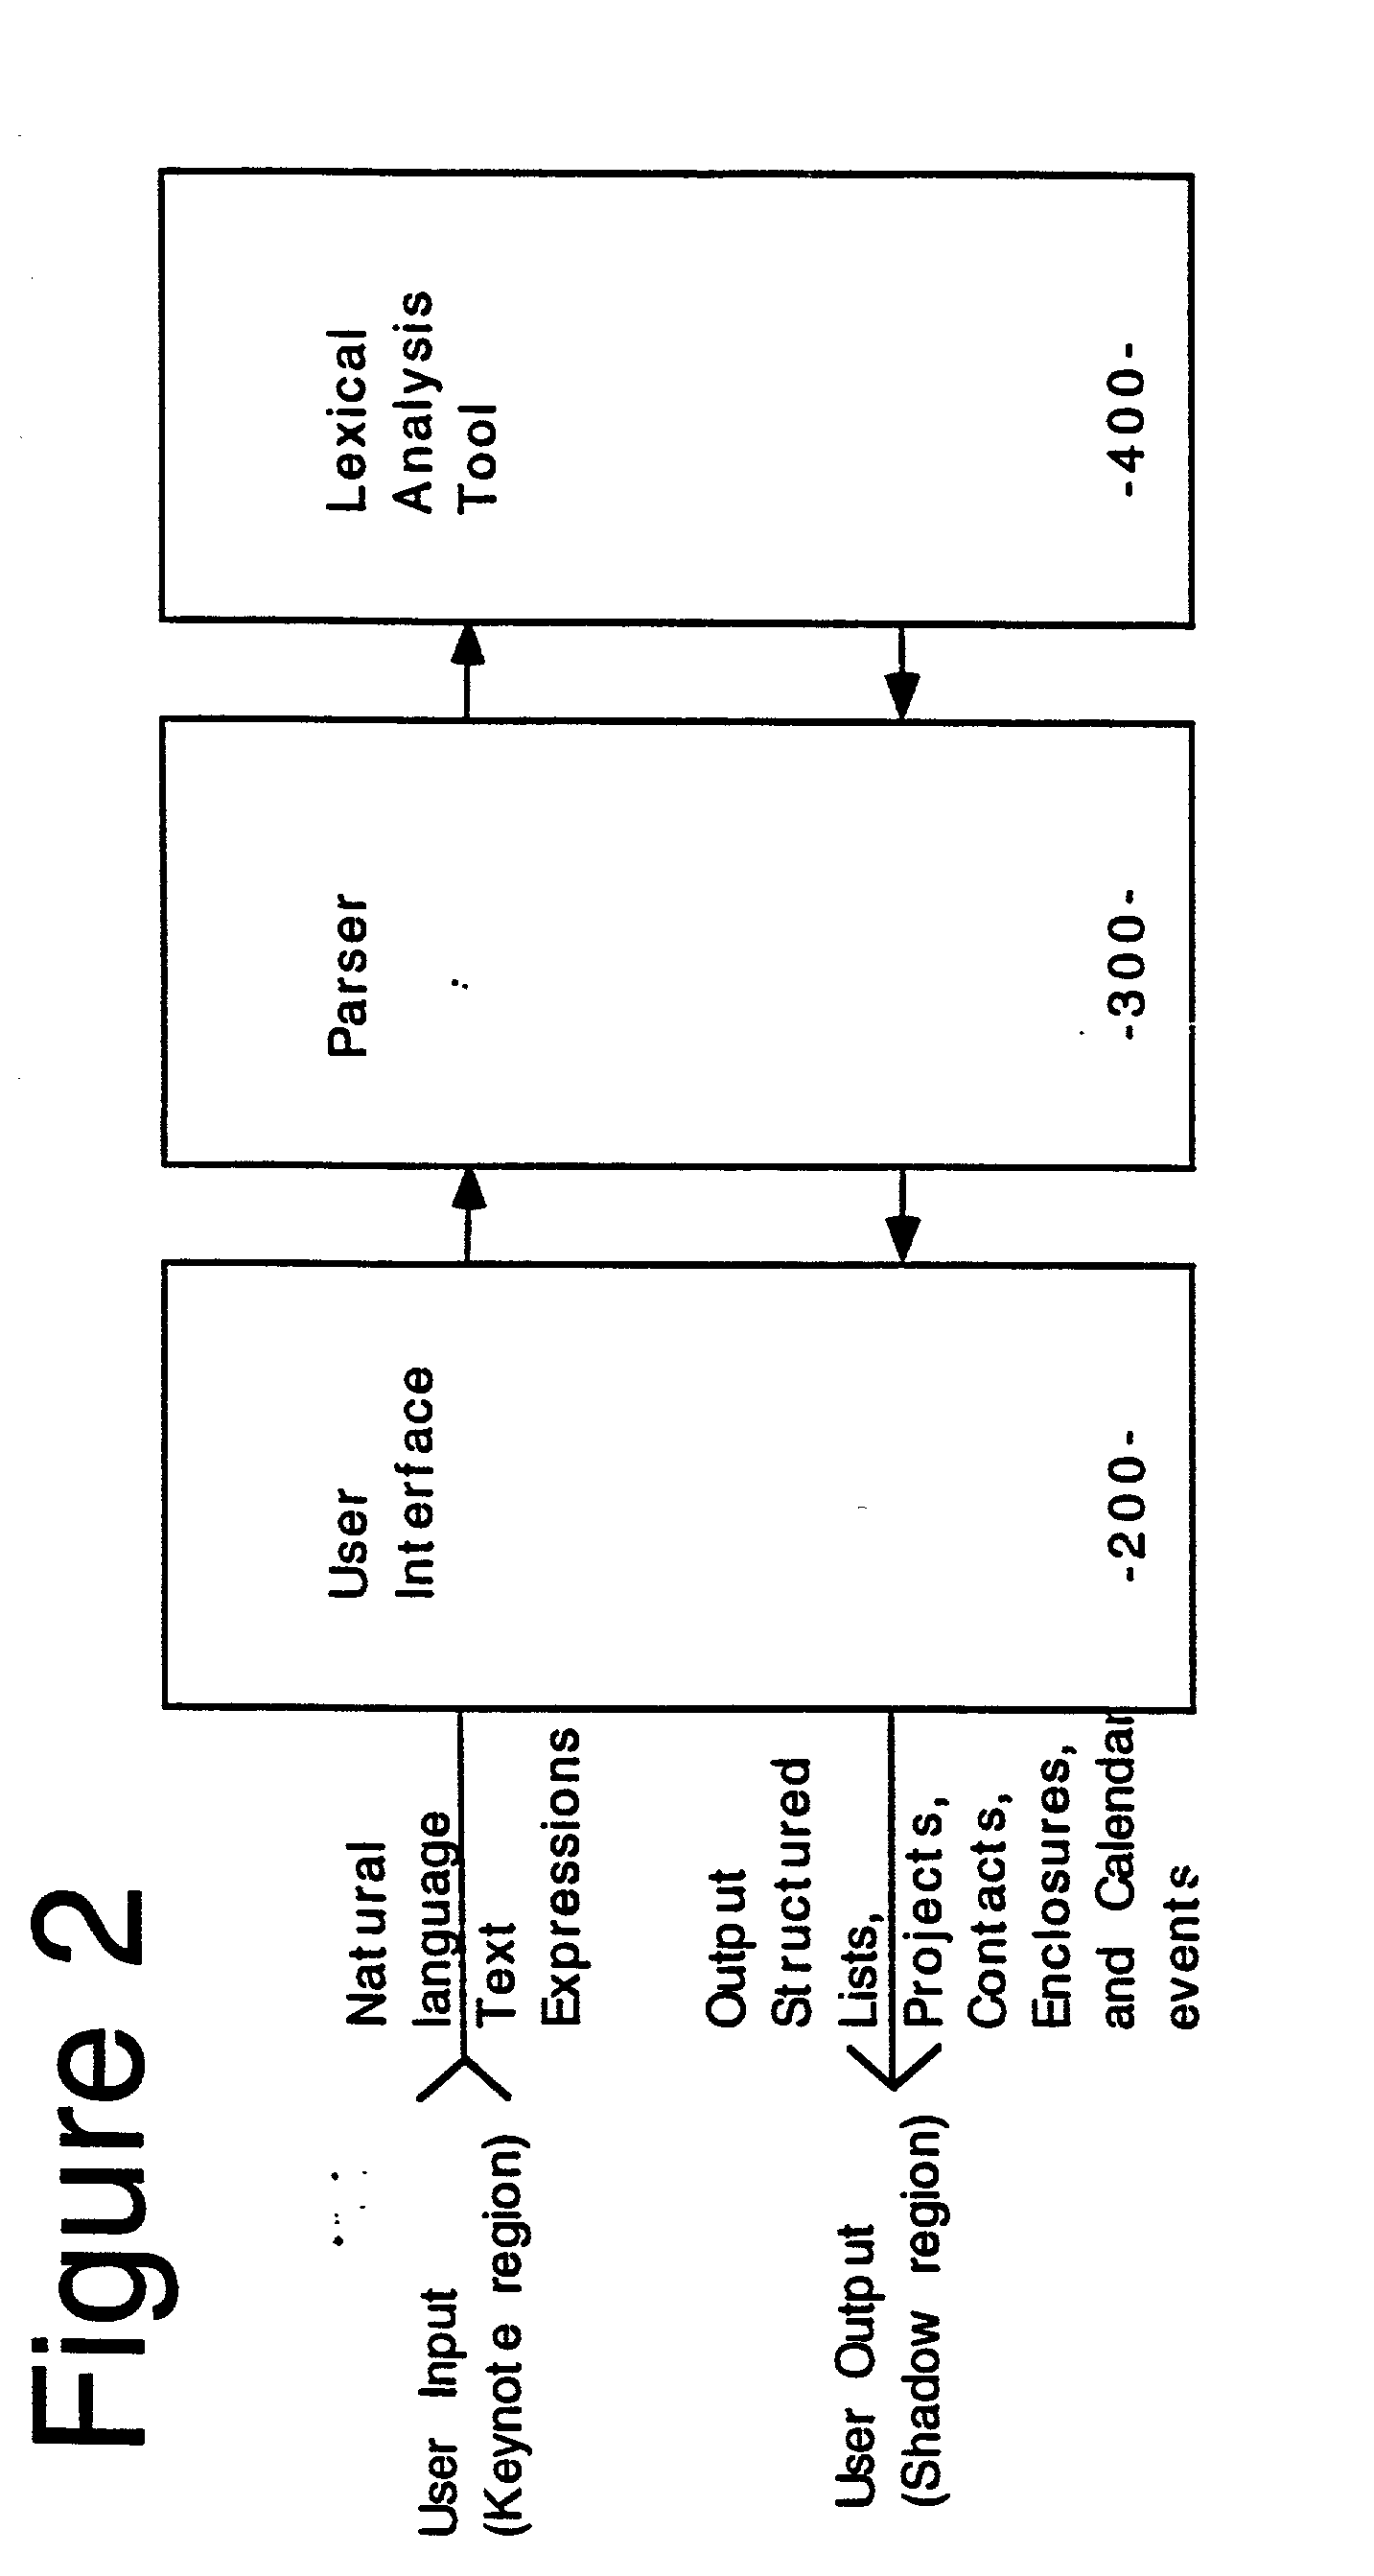 Method and apparatus for group action processing between users of a collaboration system